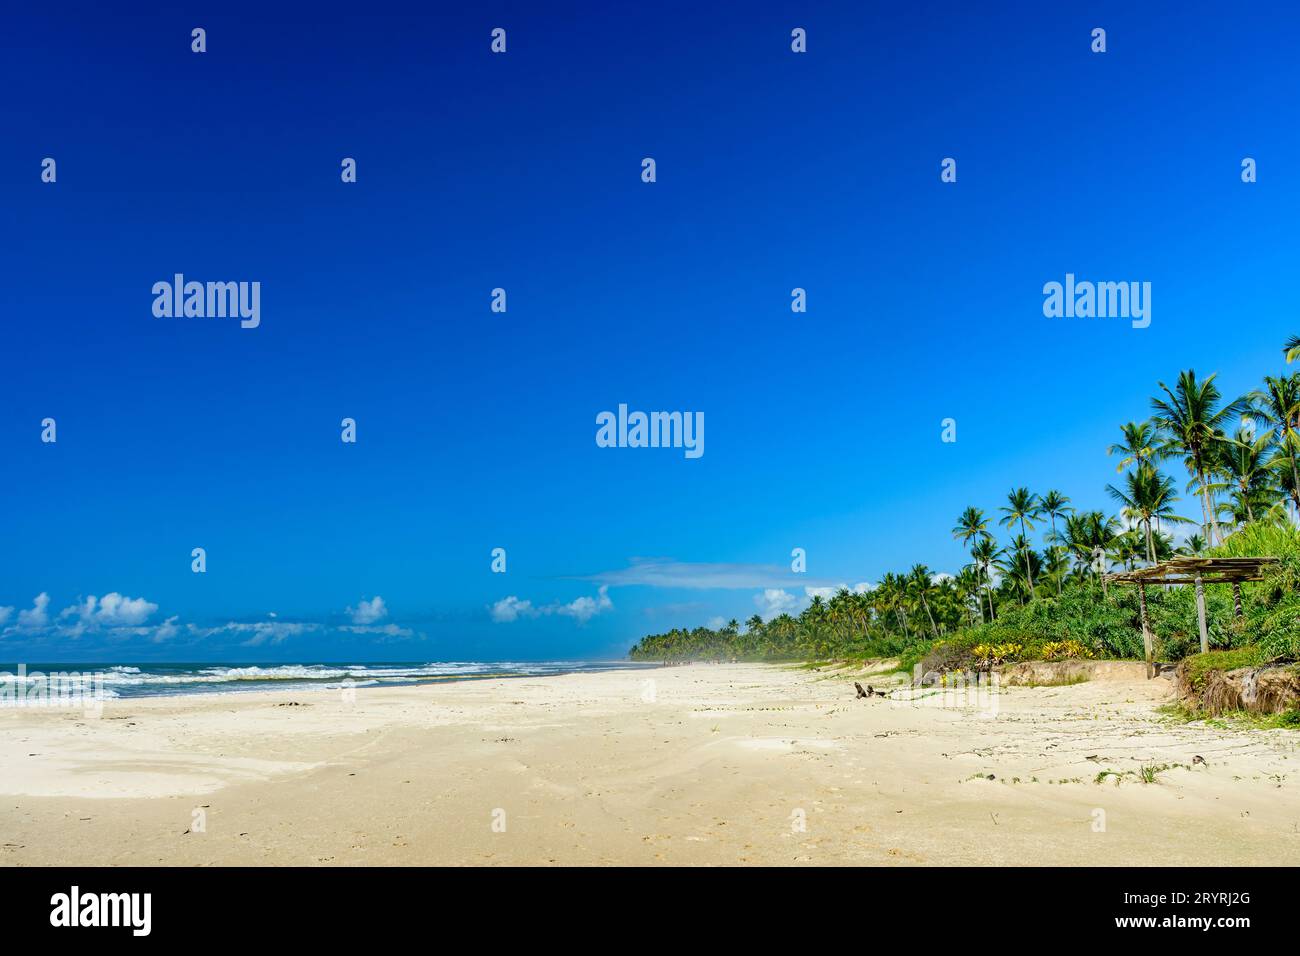 Stunning Sargi beach surrounded by the sea and coconut trees Stock Photo